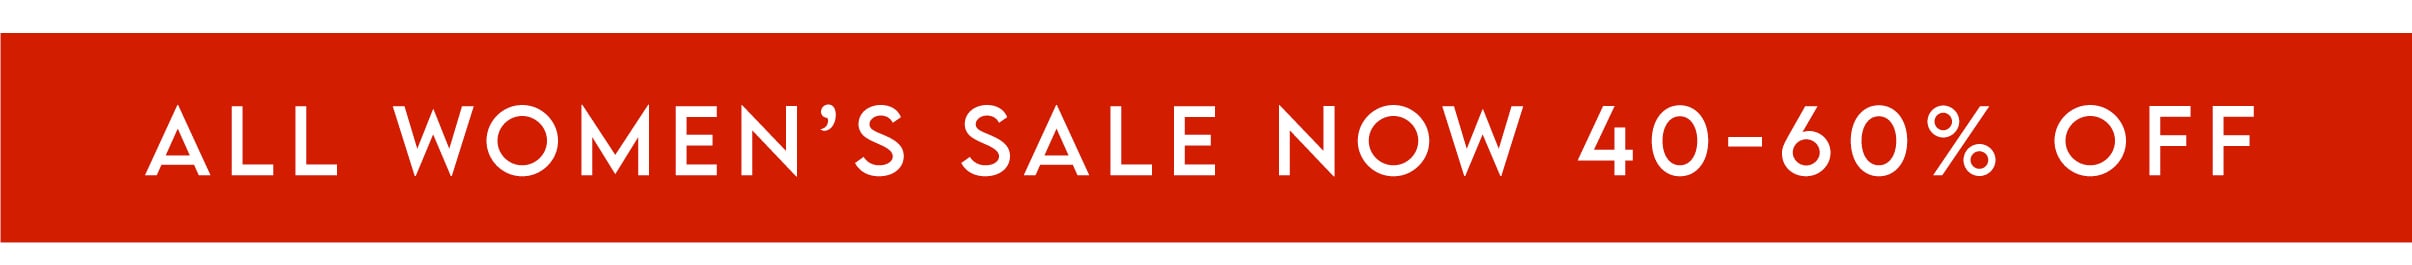 All Women's Sale now 40-60% off